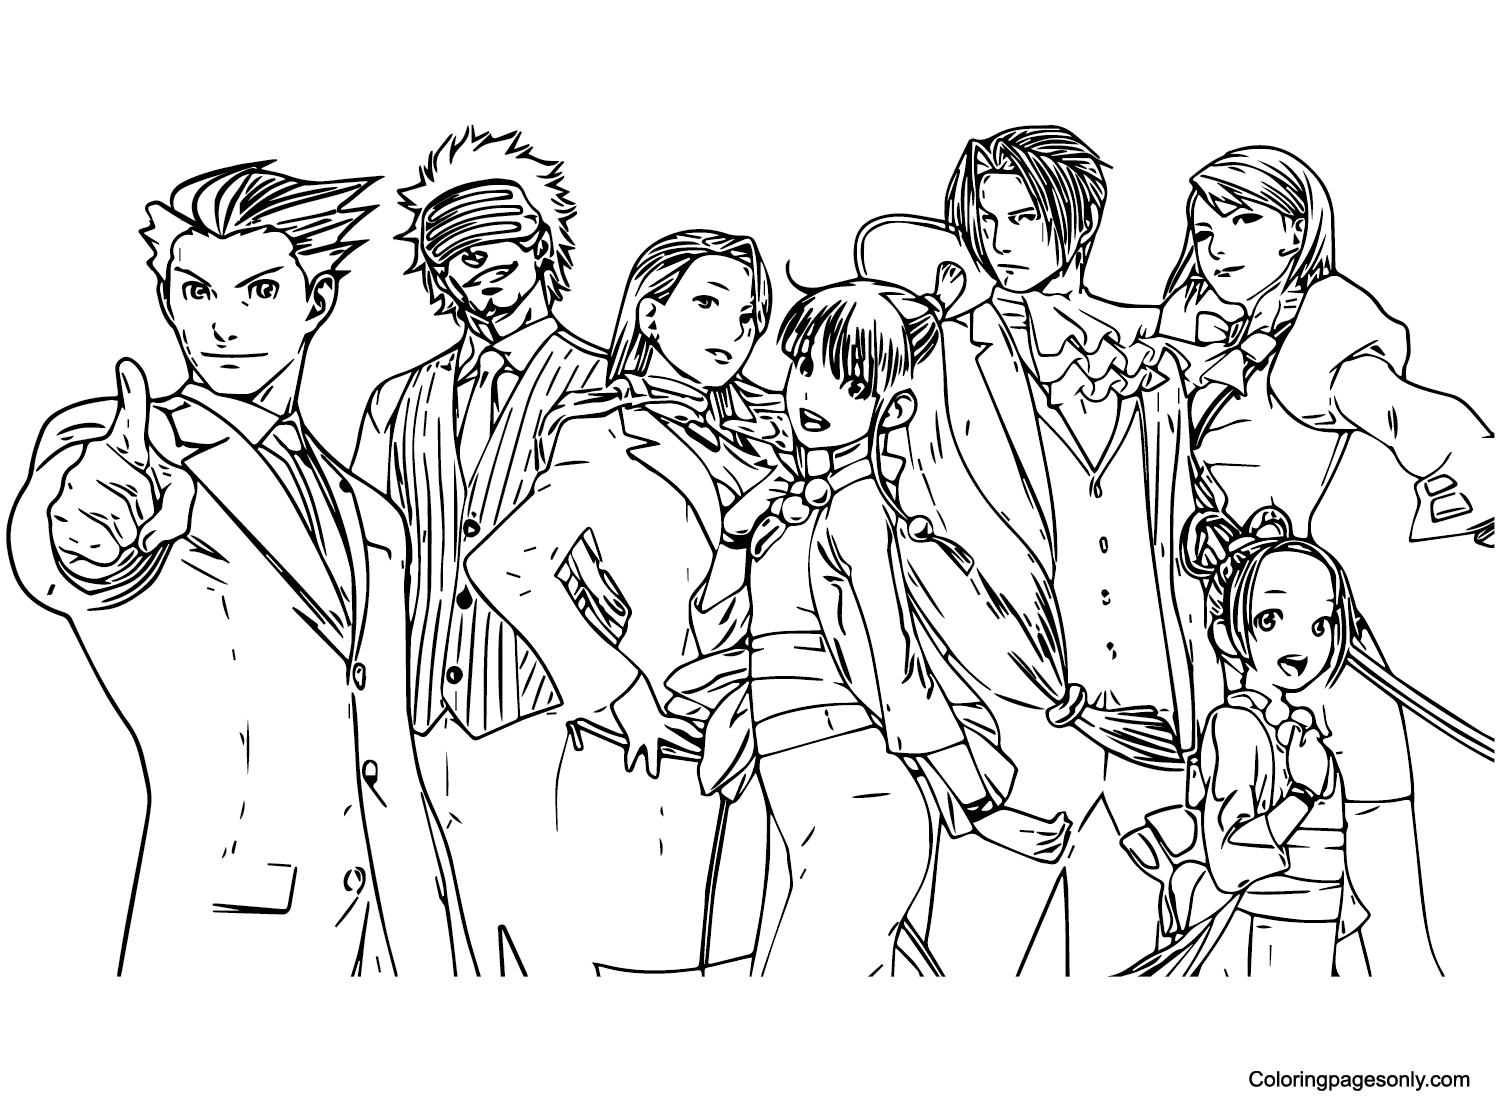 Personages Ace Attorney van Ace Attorney